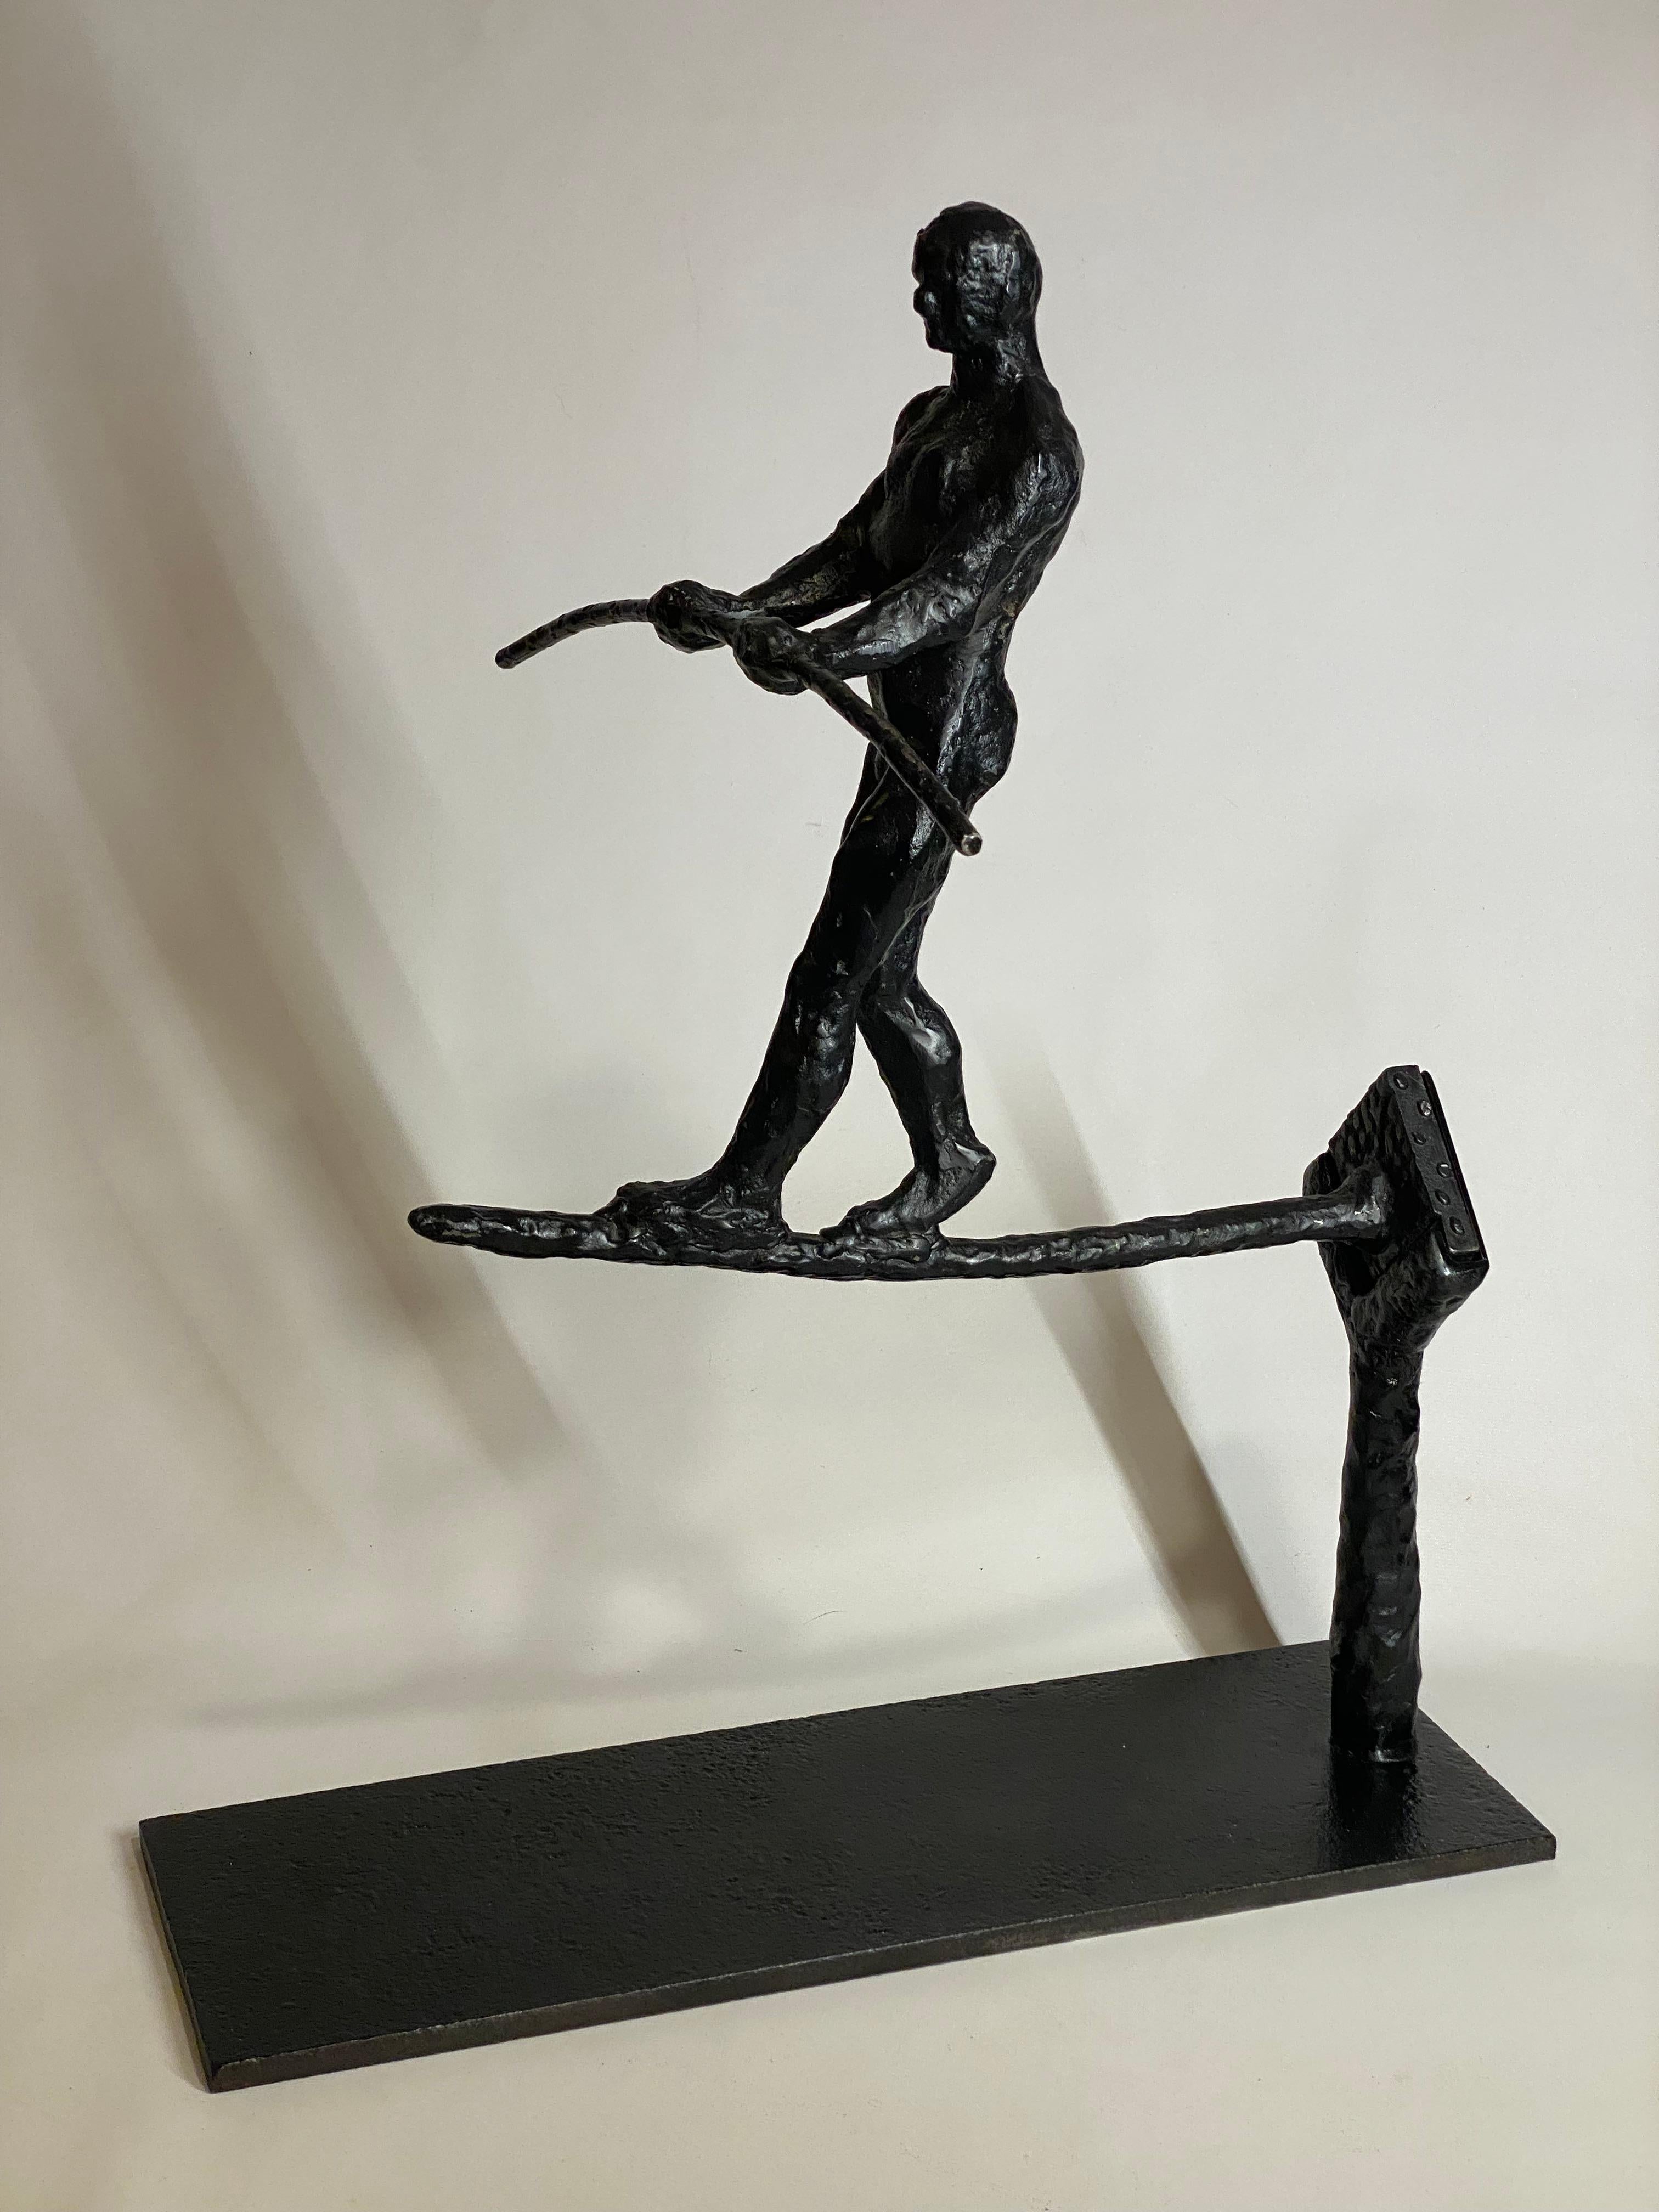 Brutalist period highwire artist in black patinated steel. The aerialist artist comes in two piece with the base and the actual sculpture that fits into the shoe on the base. The artist has rendered the muscular male figure perfectly balanced with